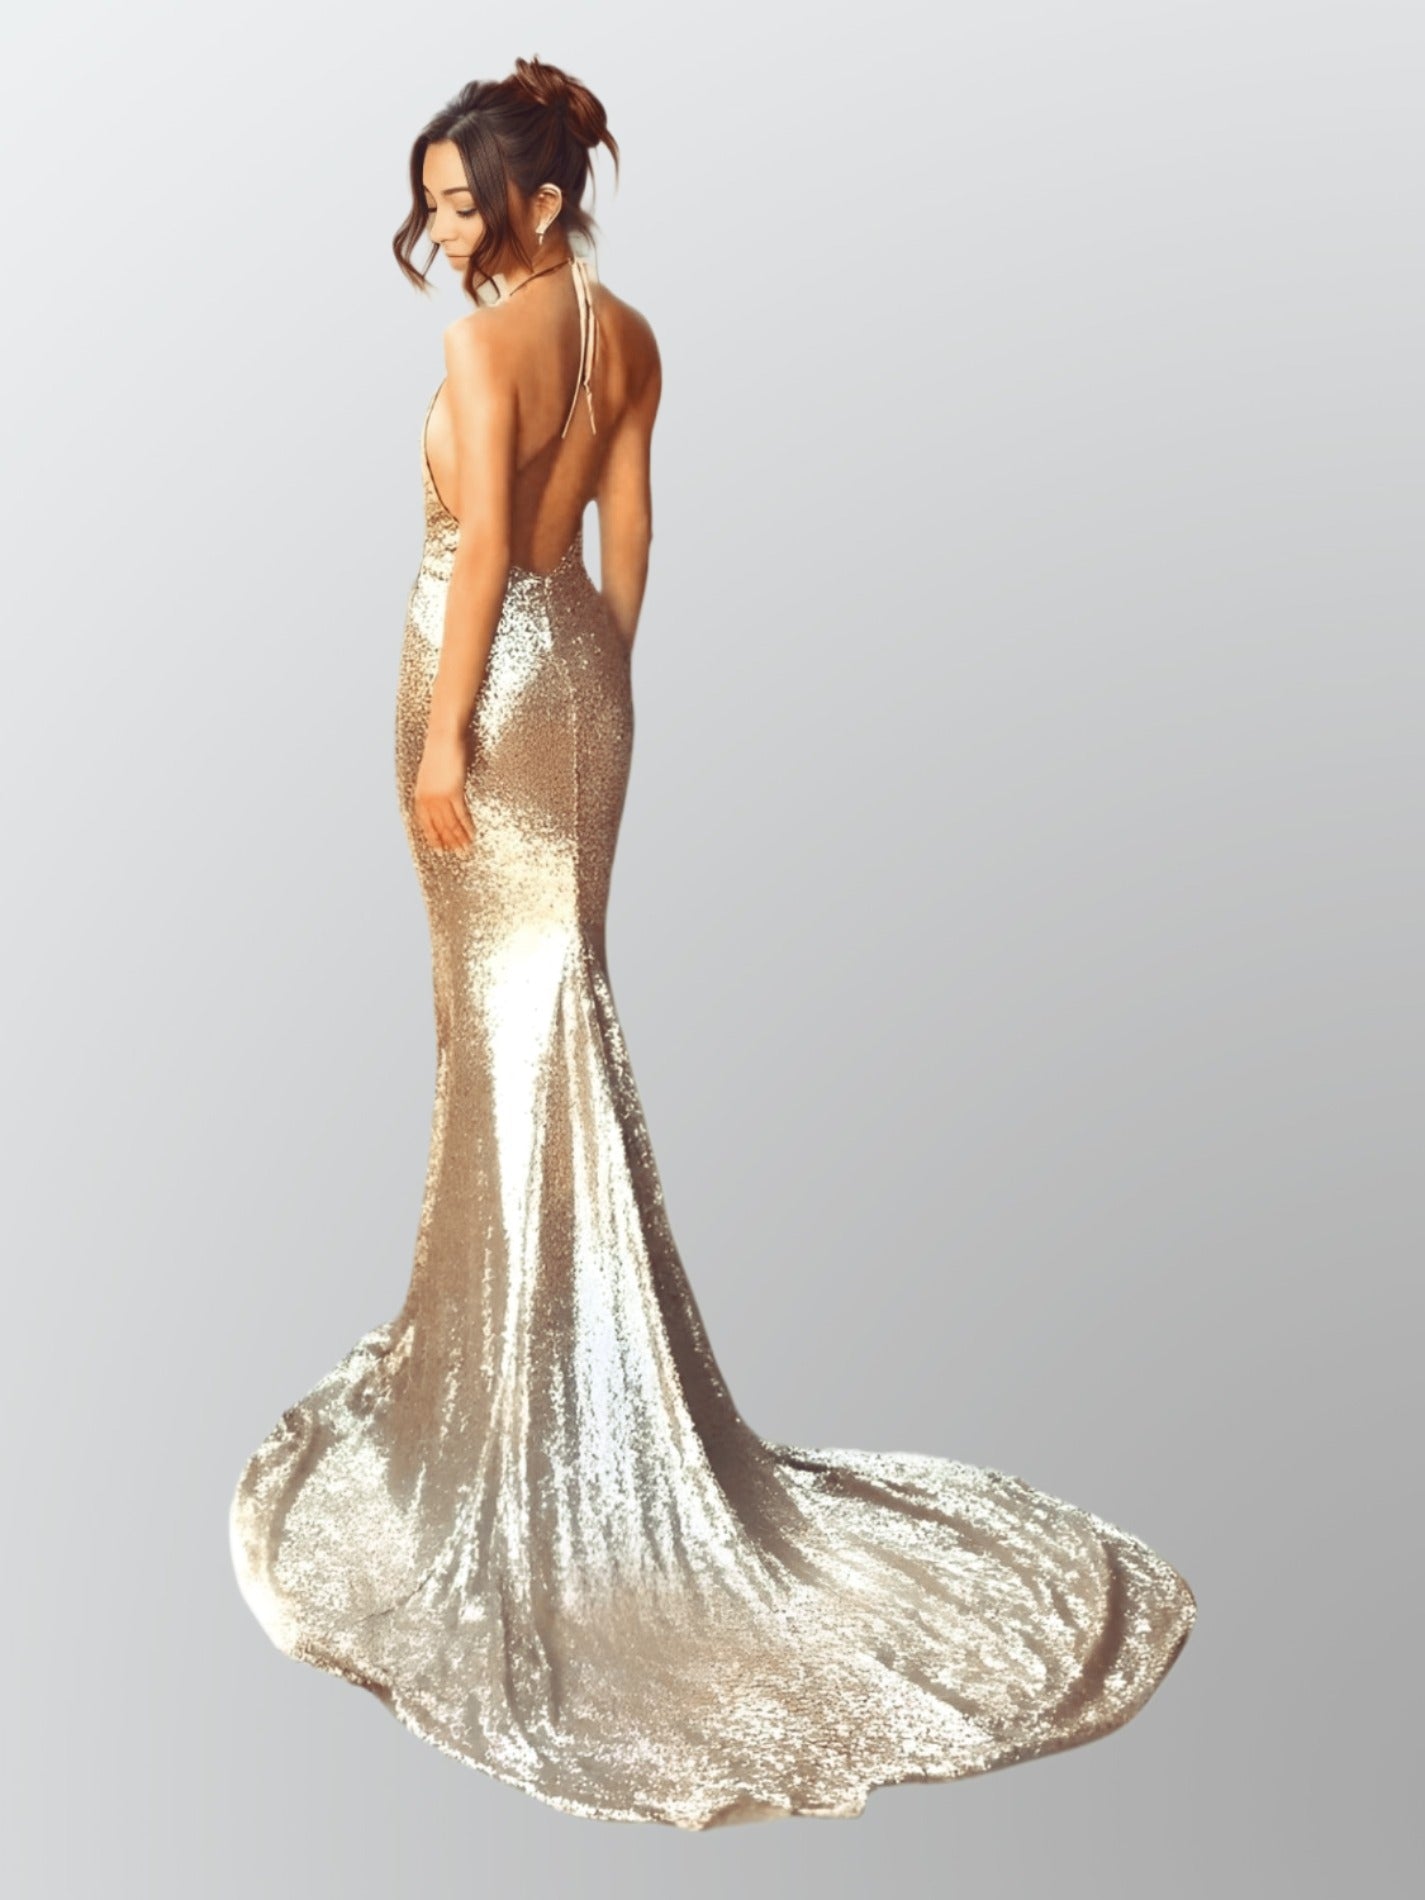 Women from back in Sexy Gold Sequined Backless Evening Gown with Train